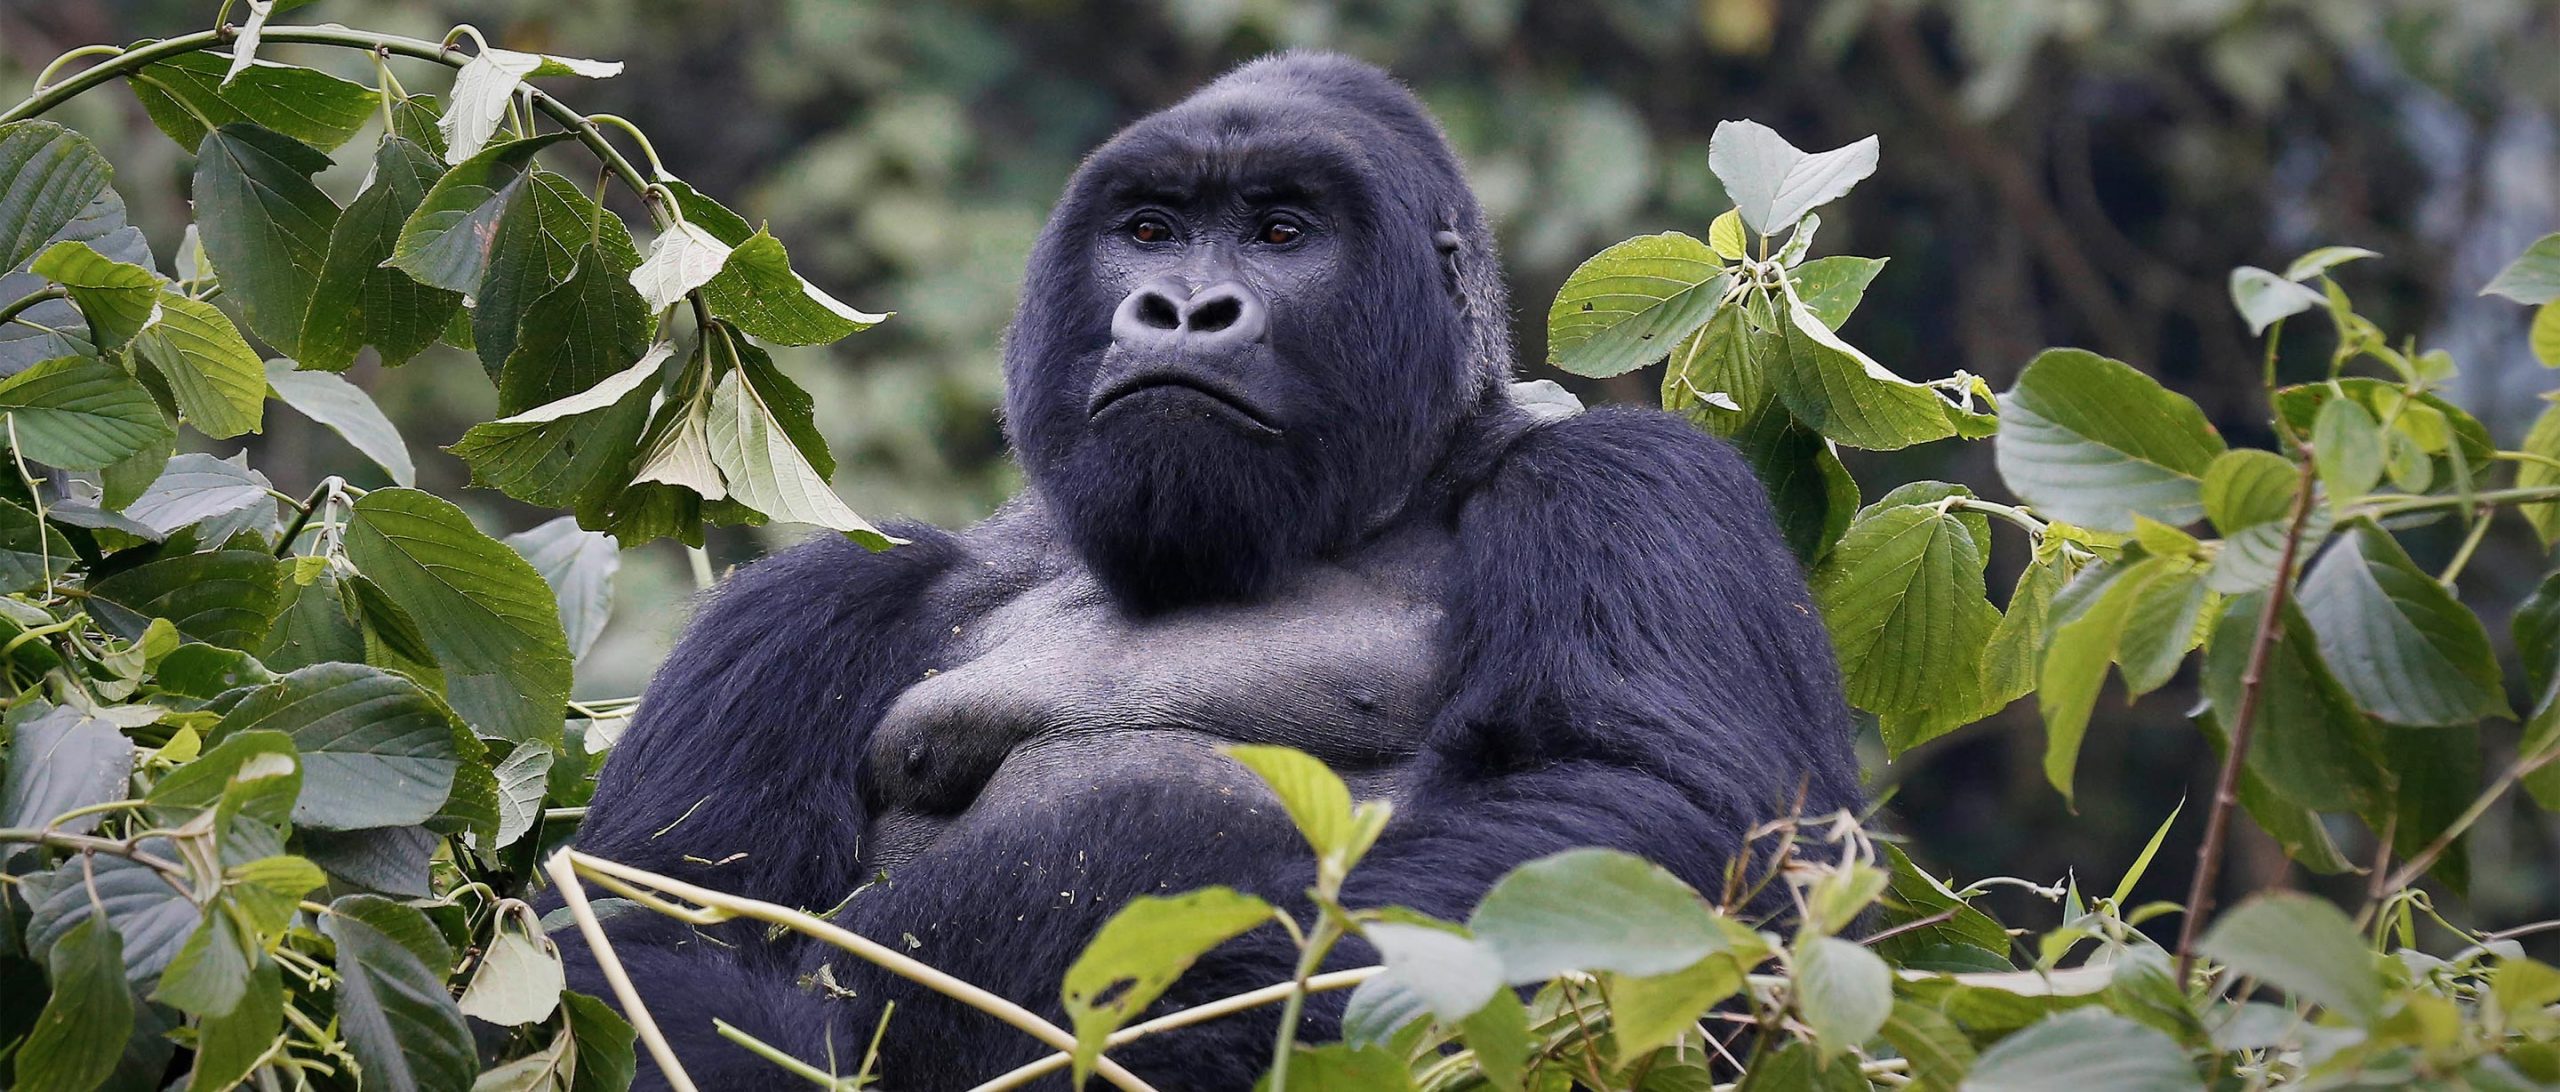 DRC becomes a hotspot for trafficking endangered great apes